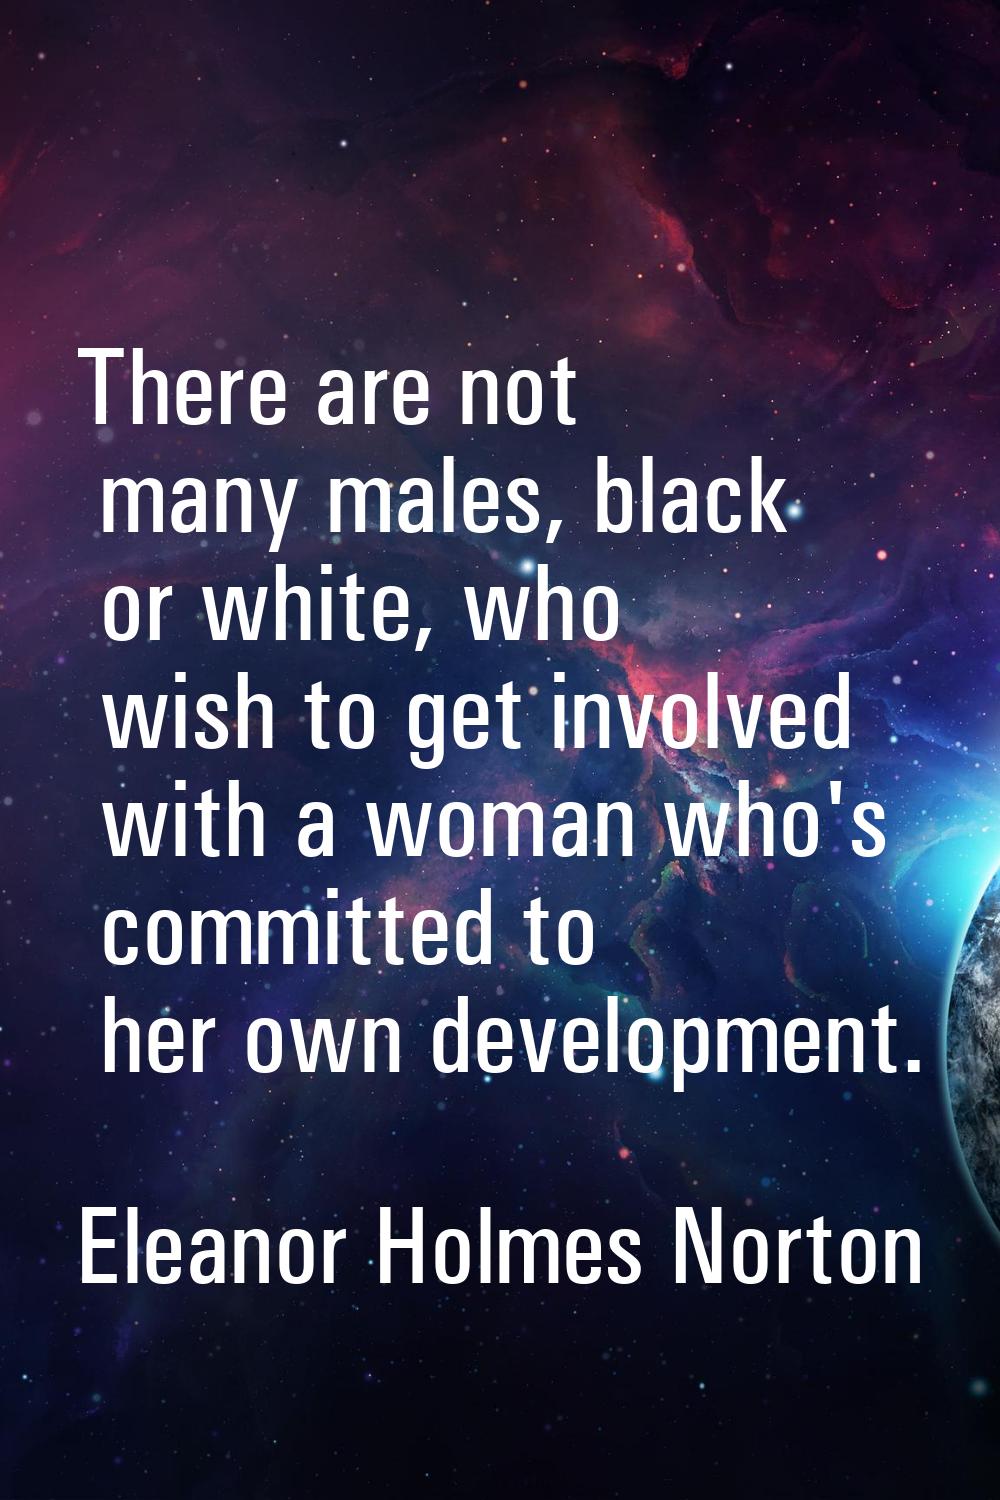 There are not many males, black or white, who wish to get involved with a woman who's committed to 